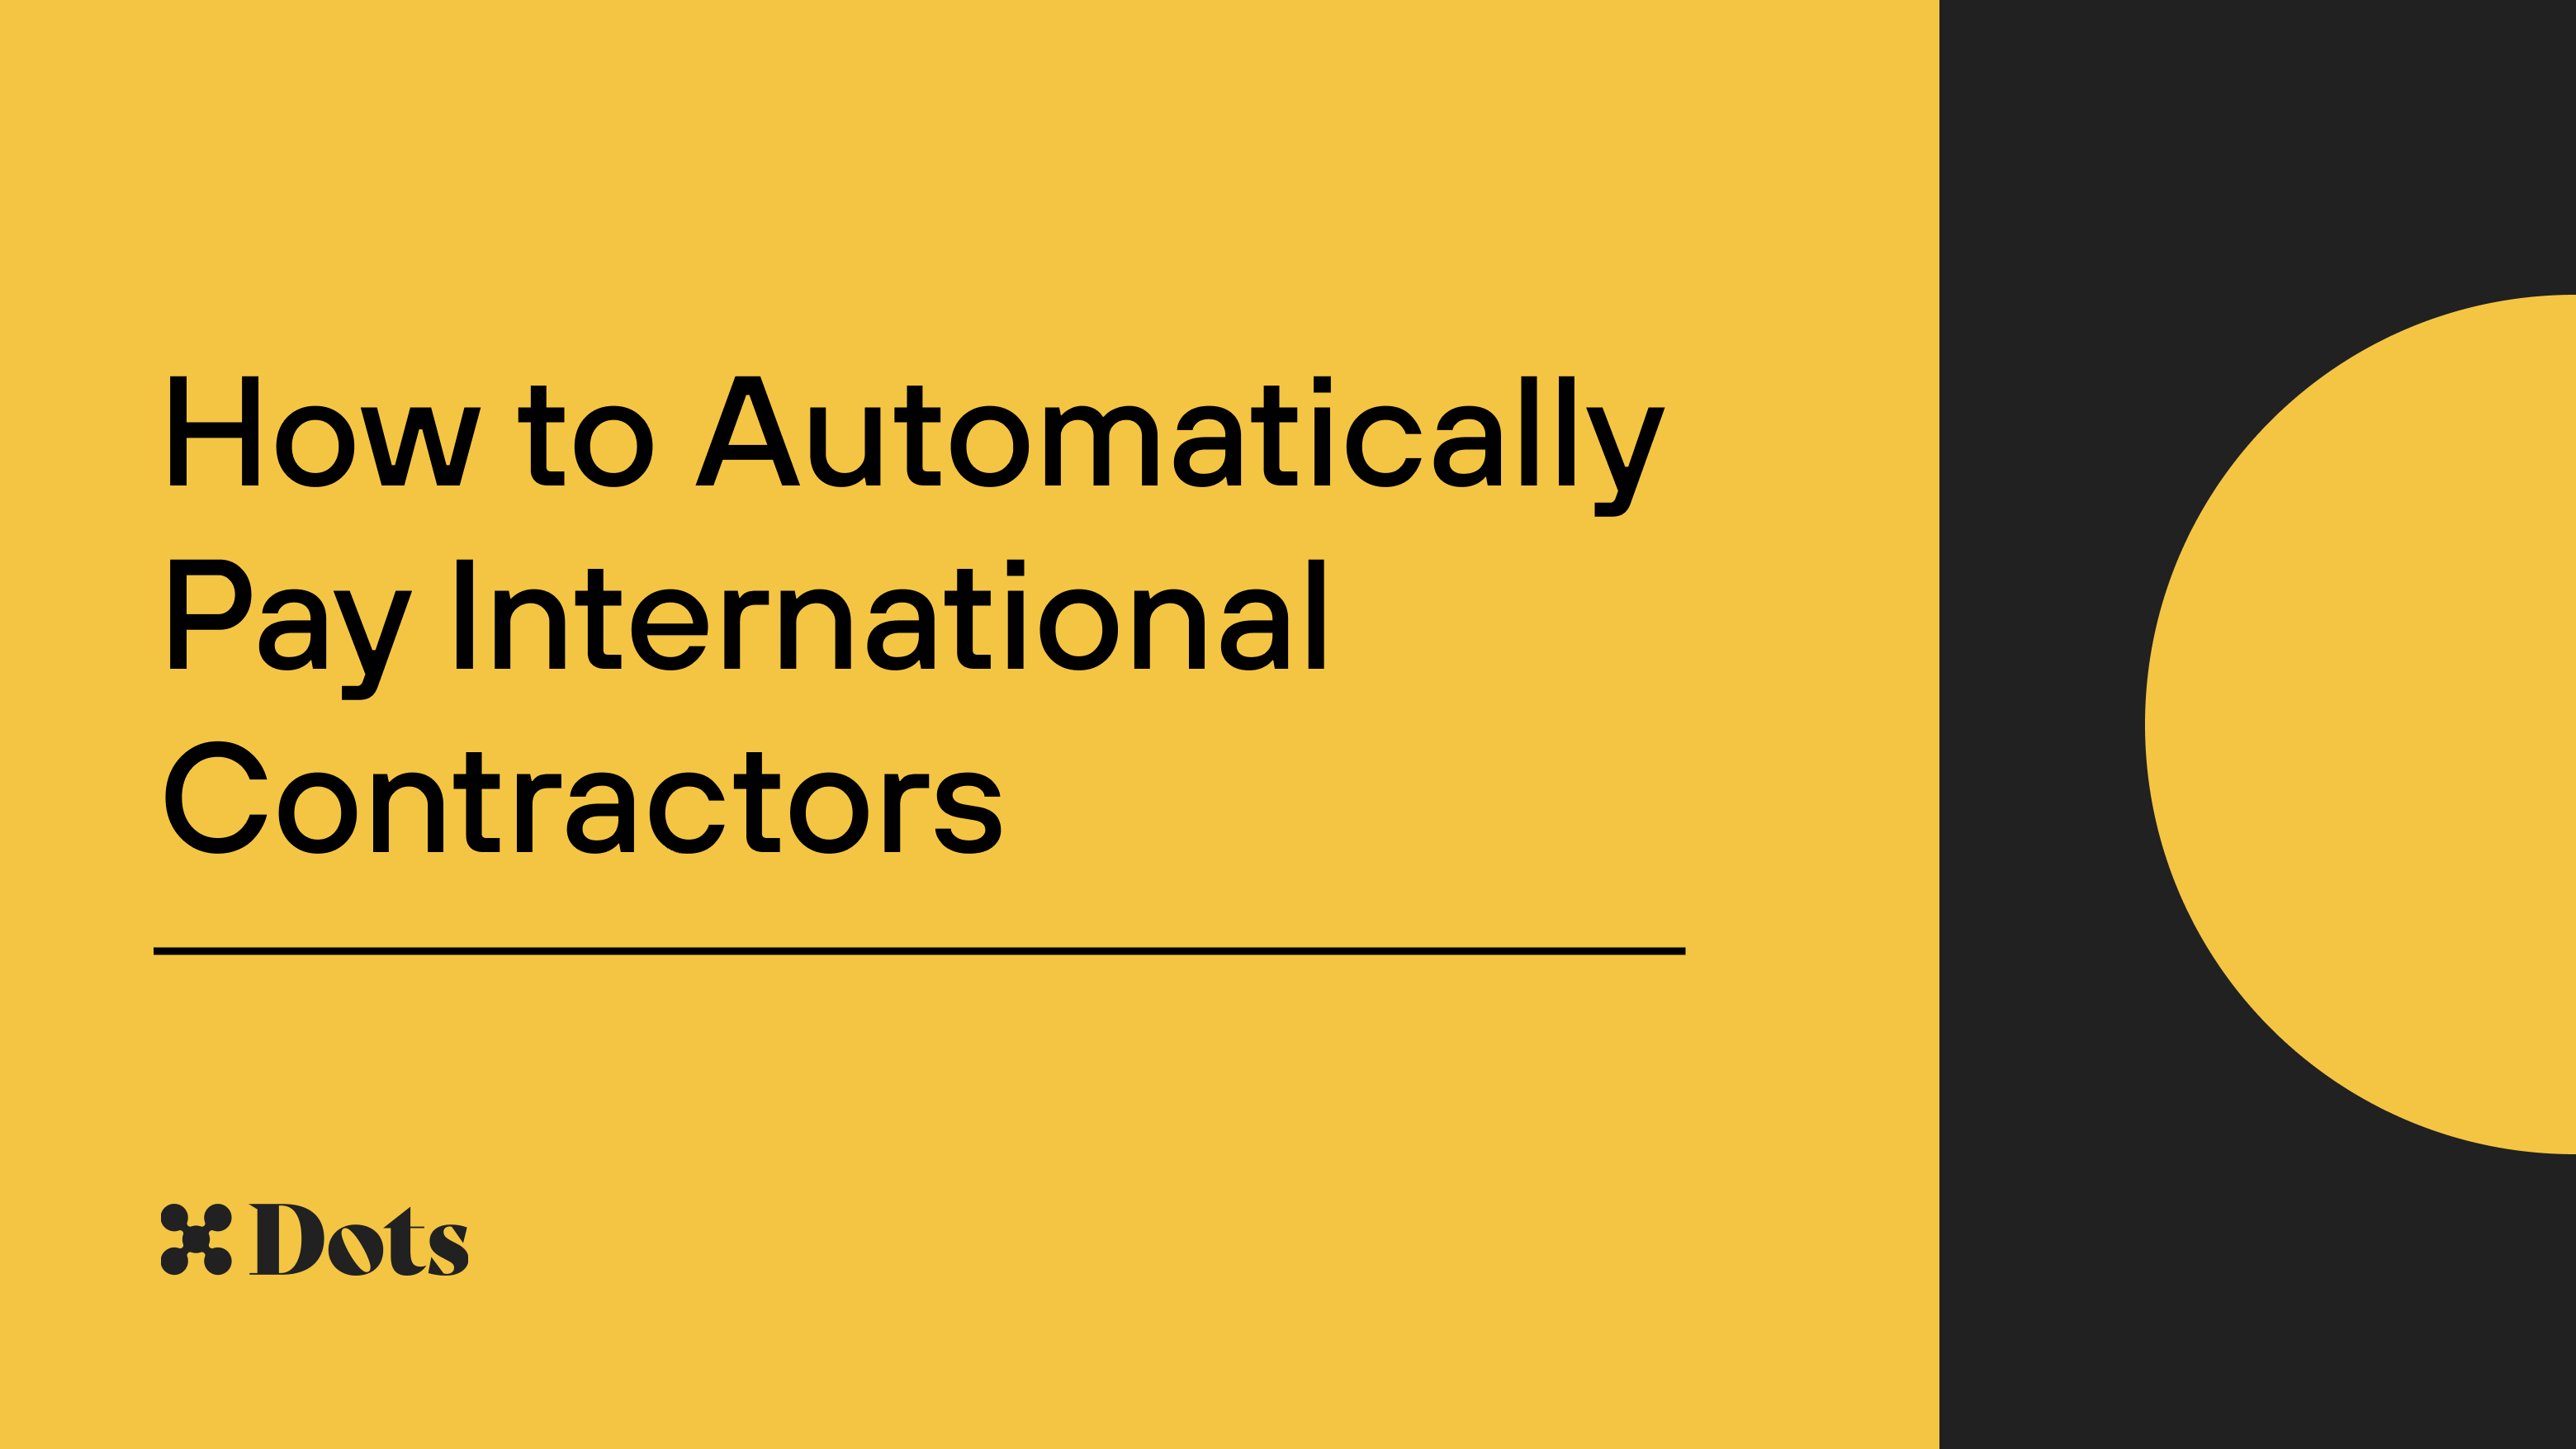 How to Automatically Pay International Contractors - Dots